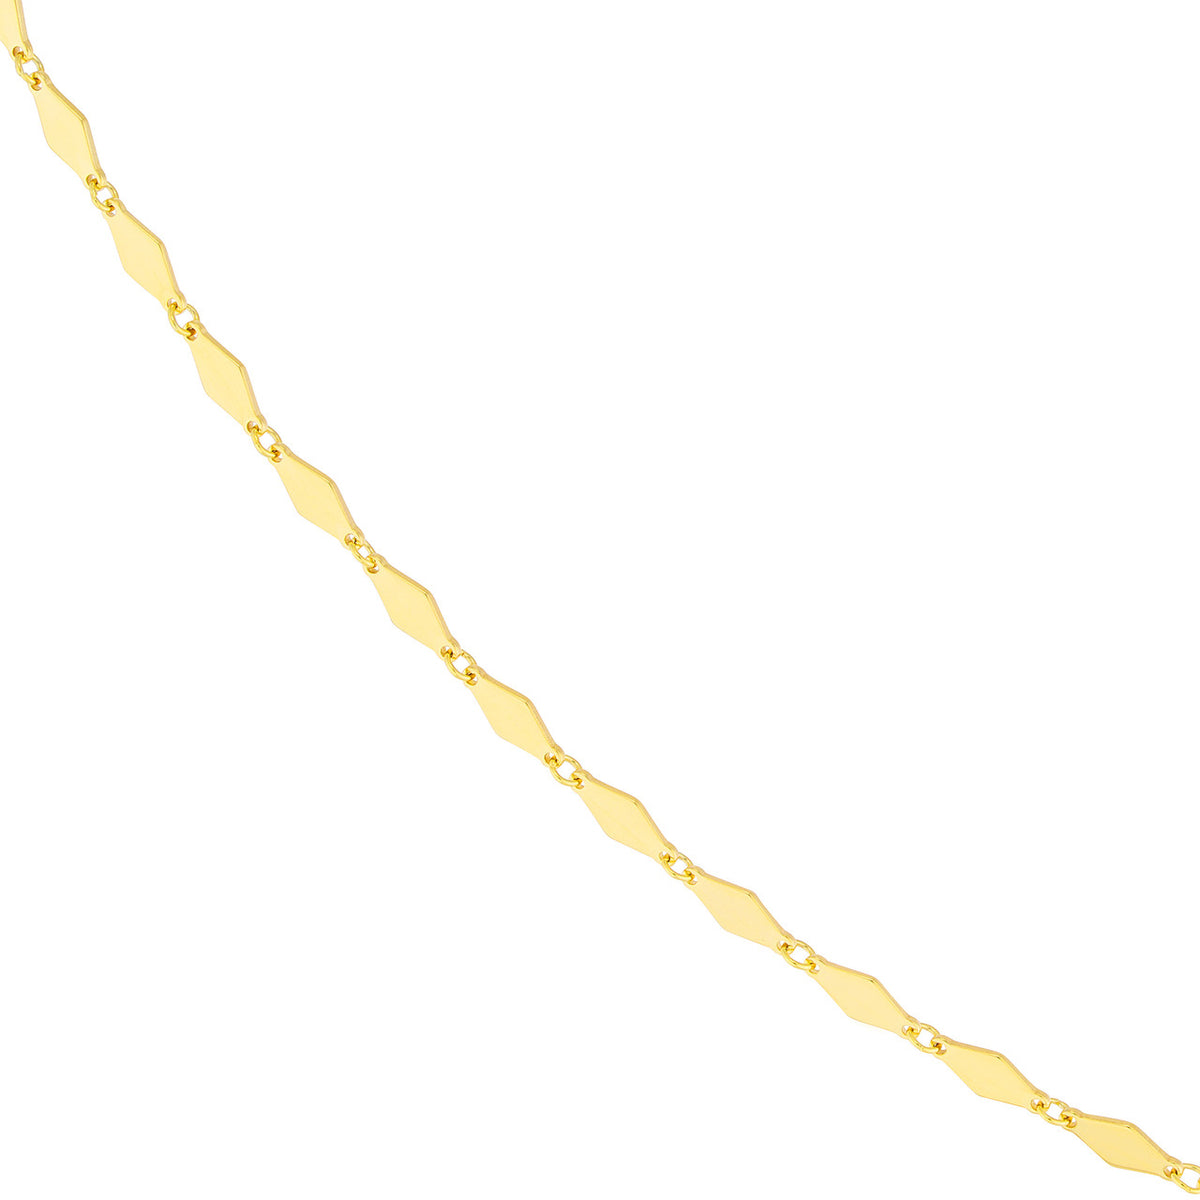 14K Yellow Gold Diamond Shaped Flat Link Chain Necklace with Lobster Lock